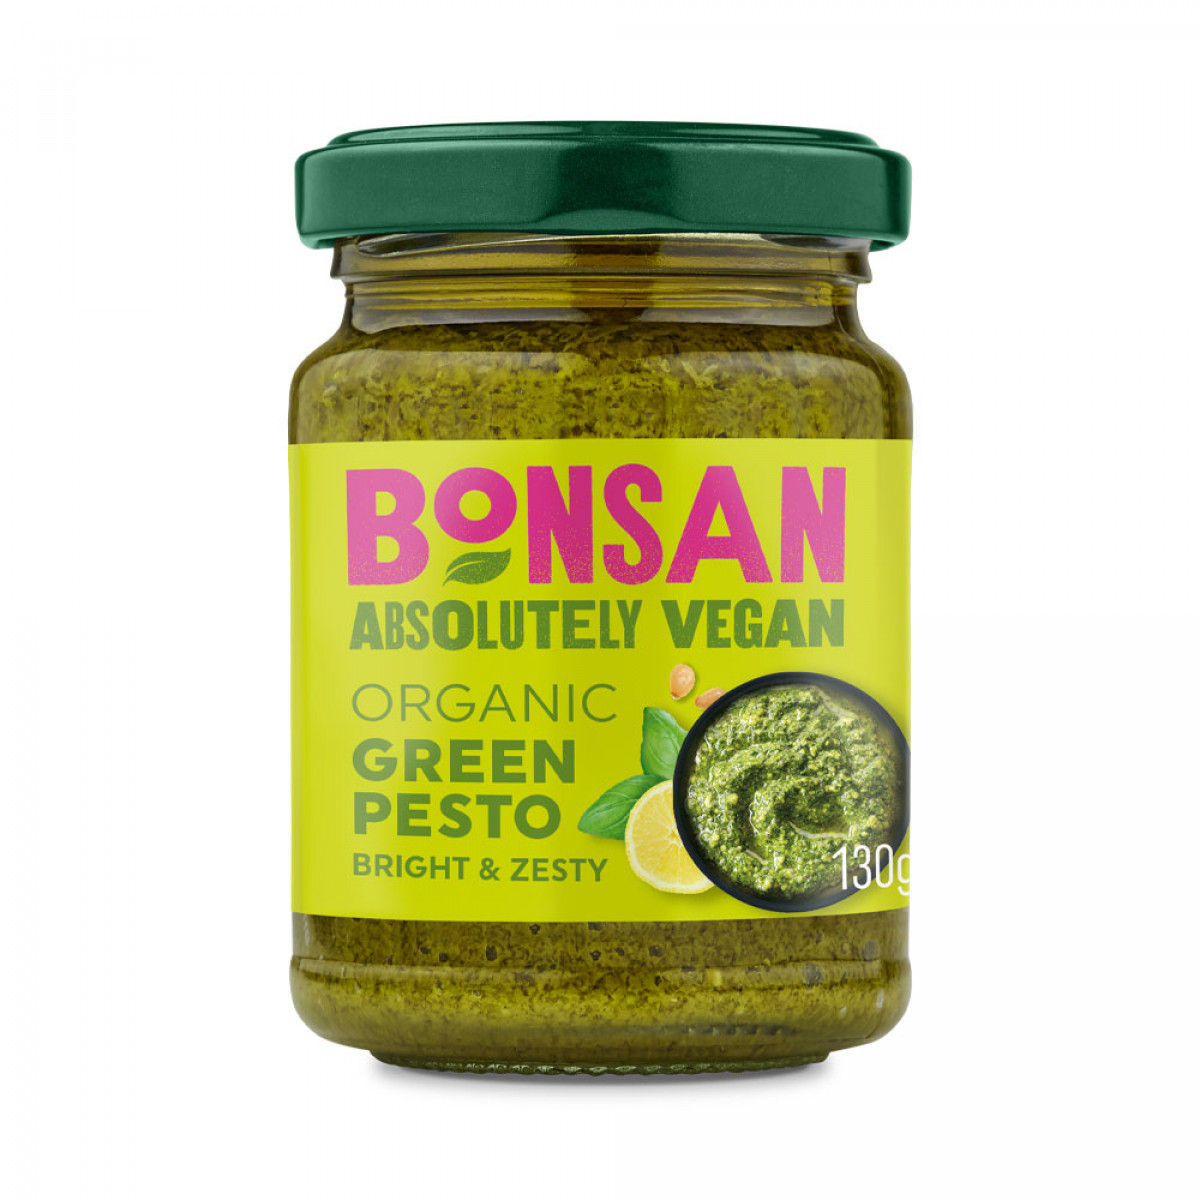 Product picture for Green Pesto